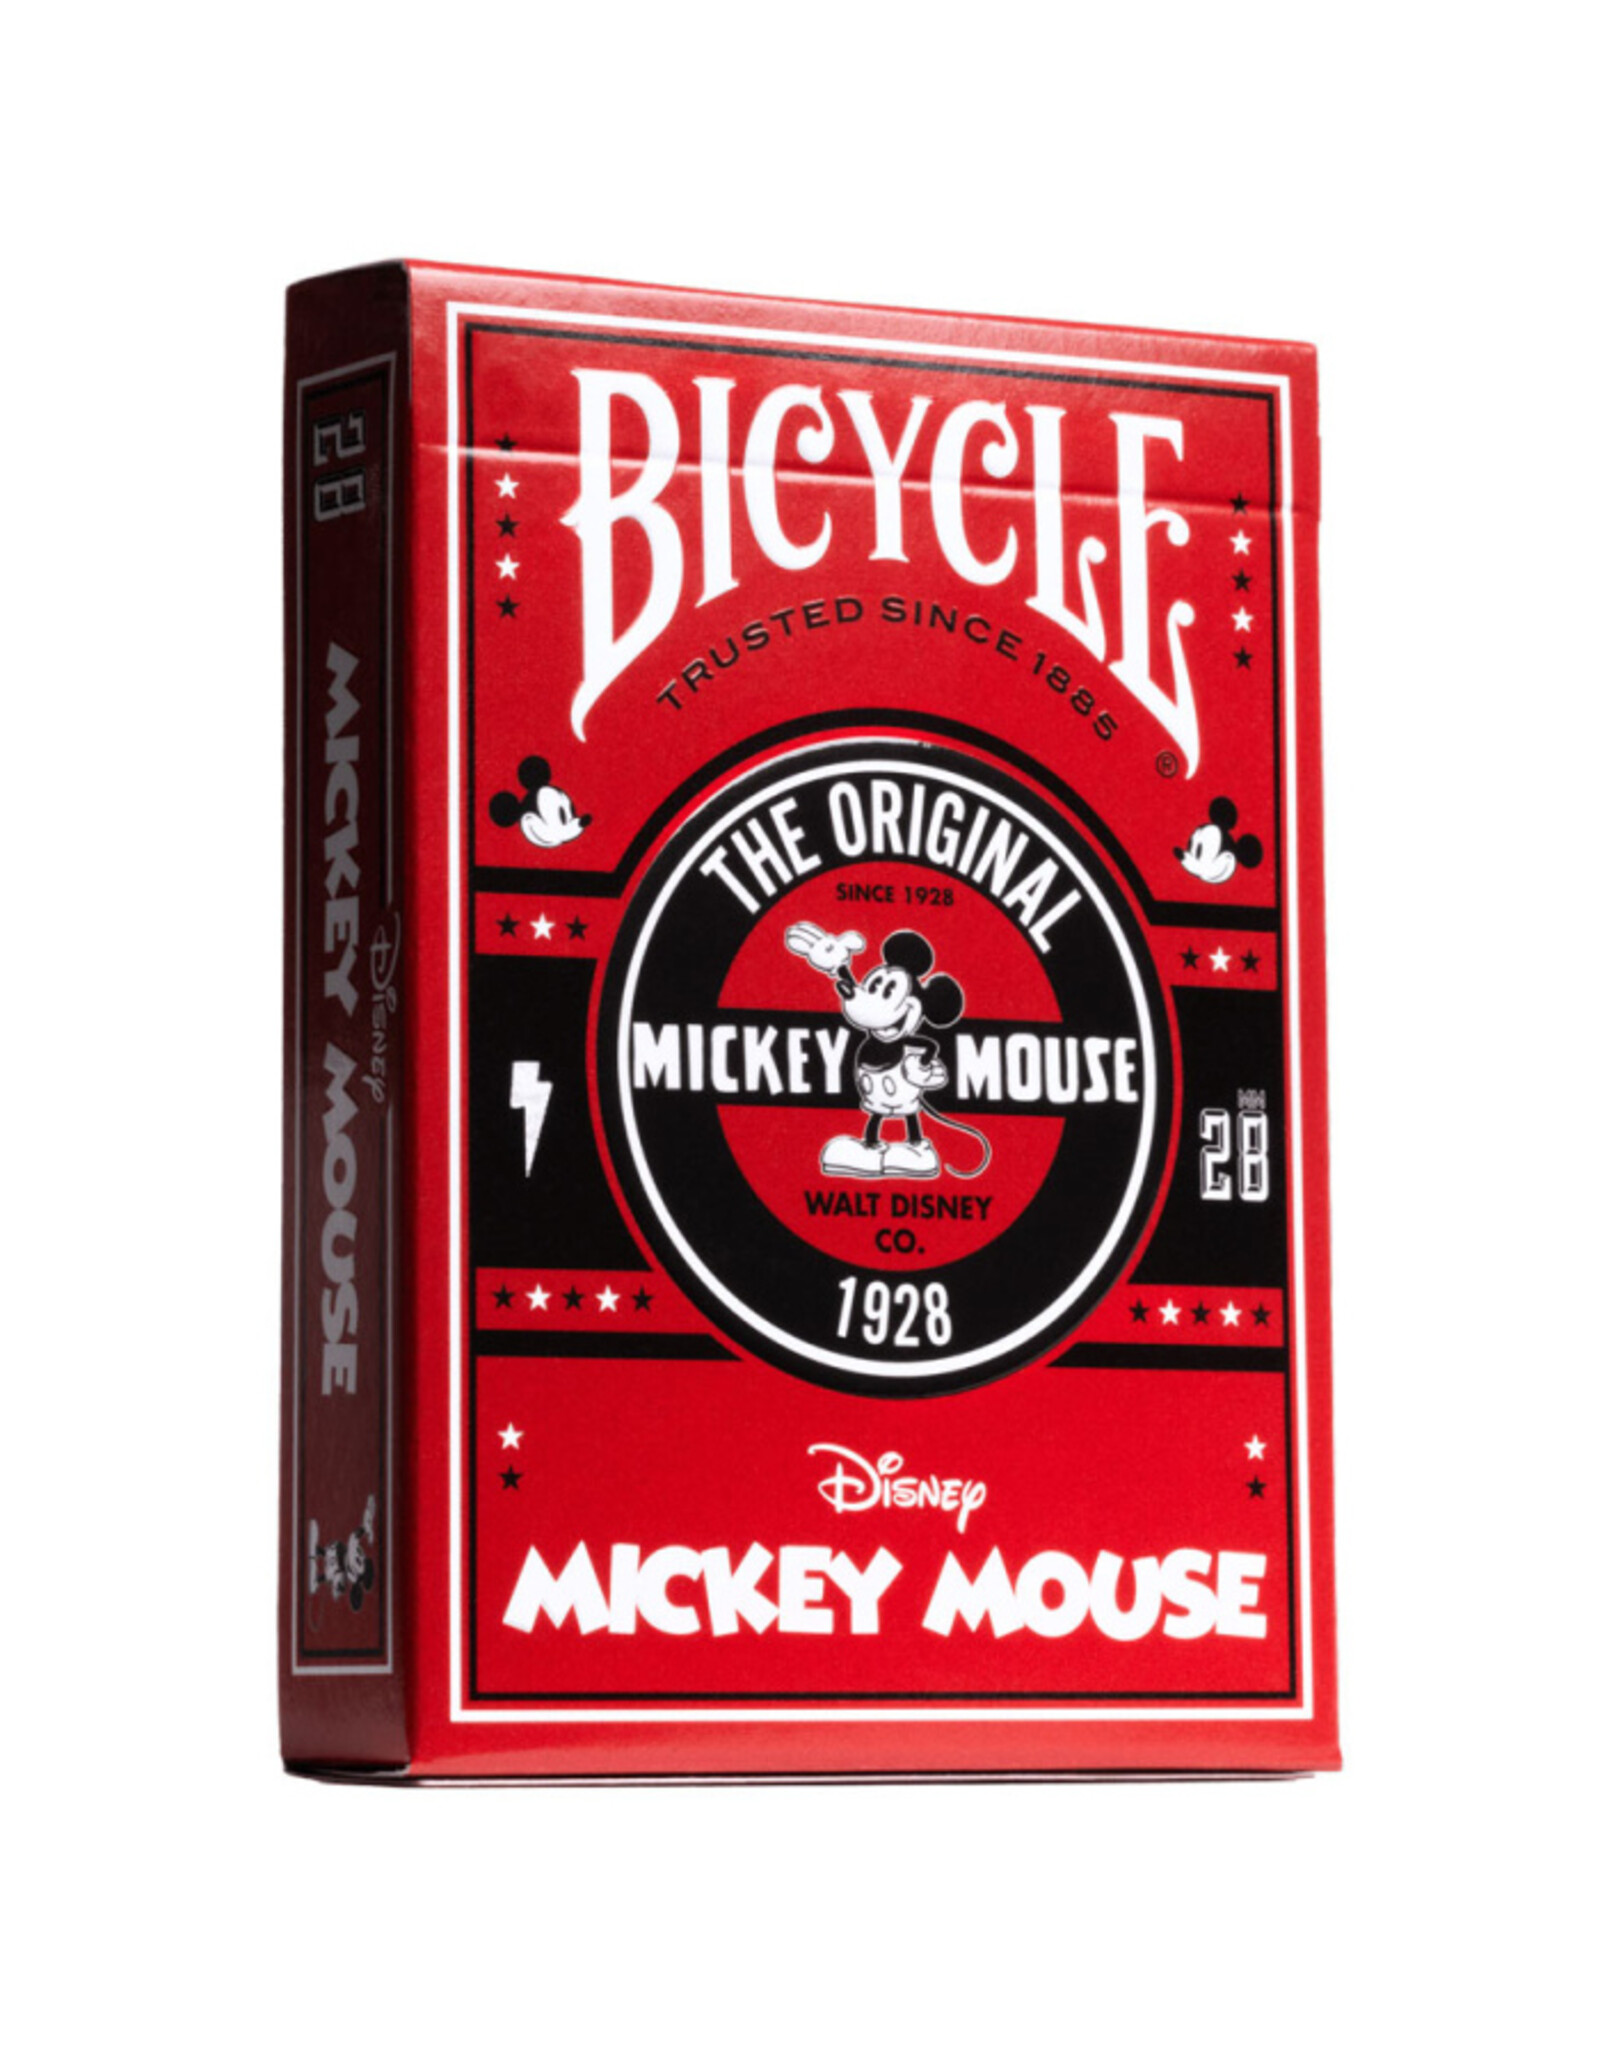 Bicycle Playing Cards: Bicycle: Disney Classic Mickey (Red)